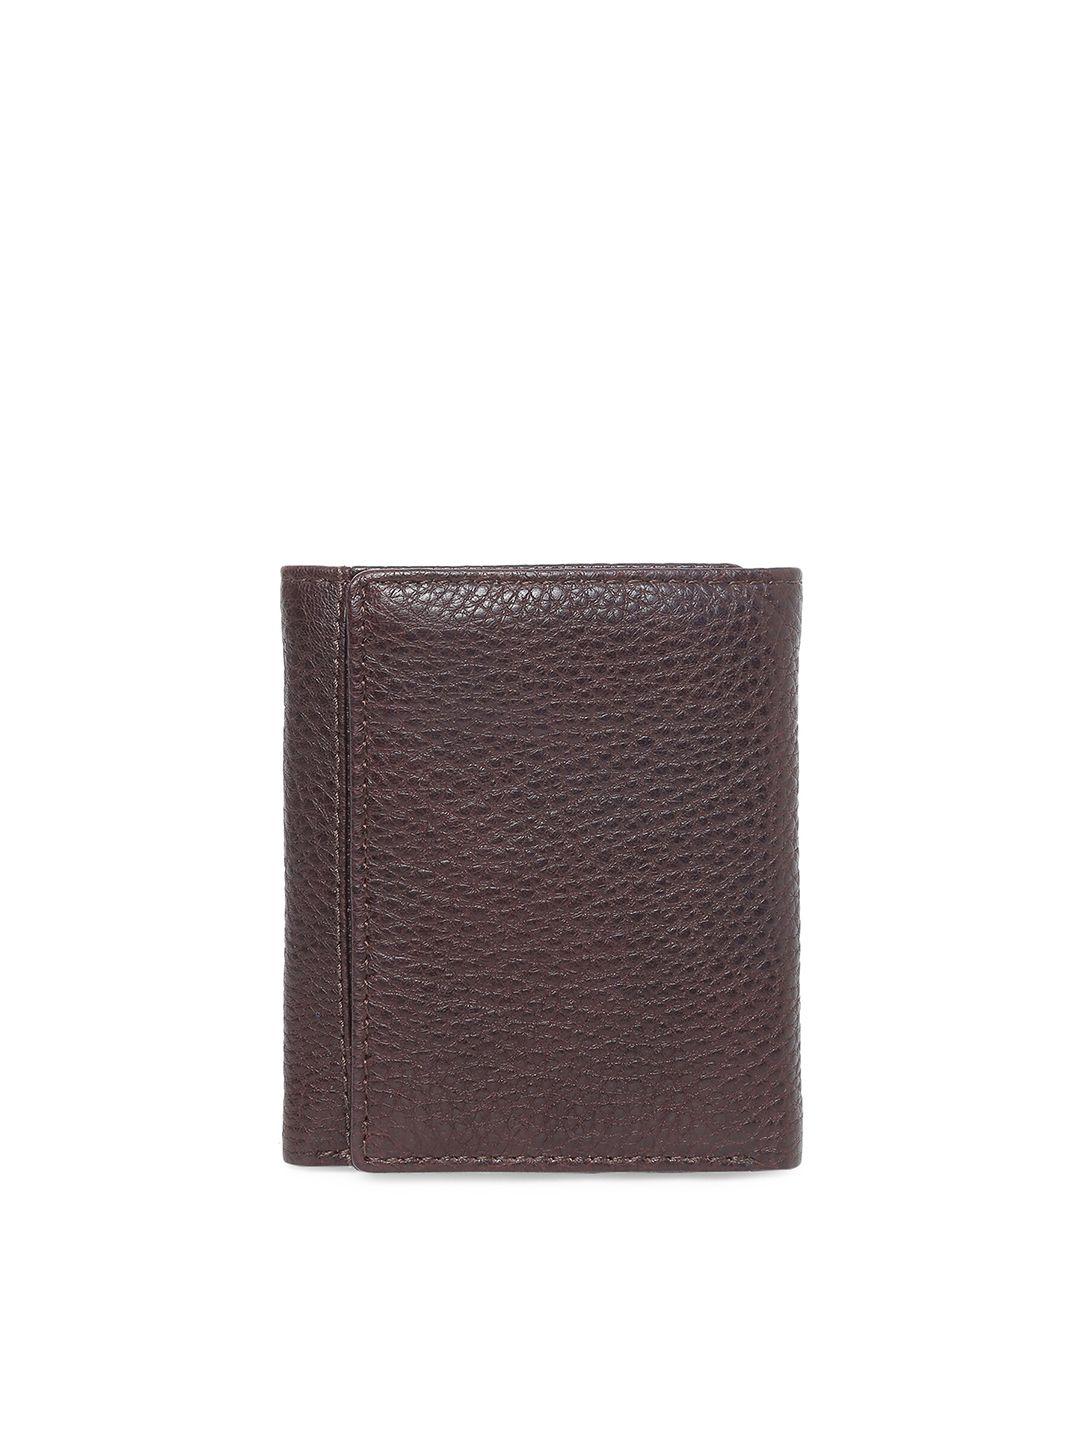 tom lang london unisex brown textured leather three fold wallet